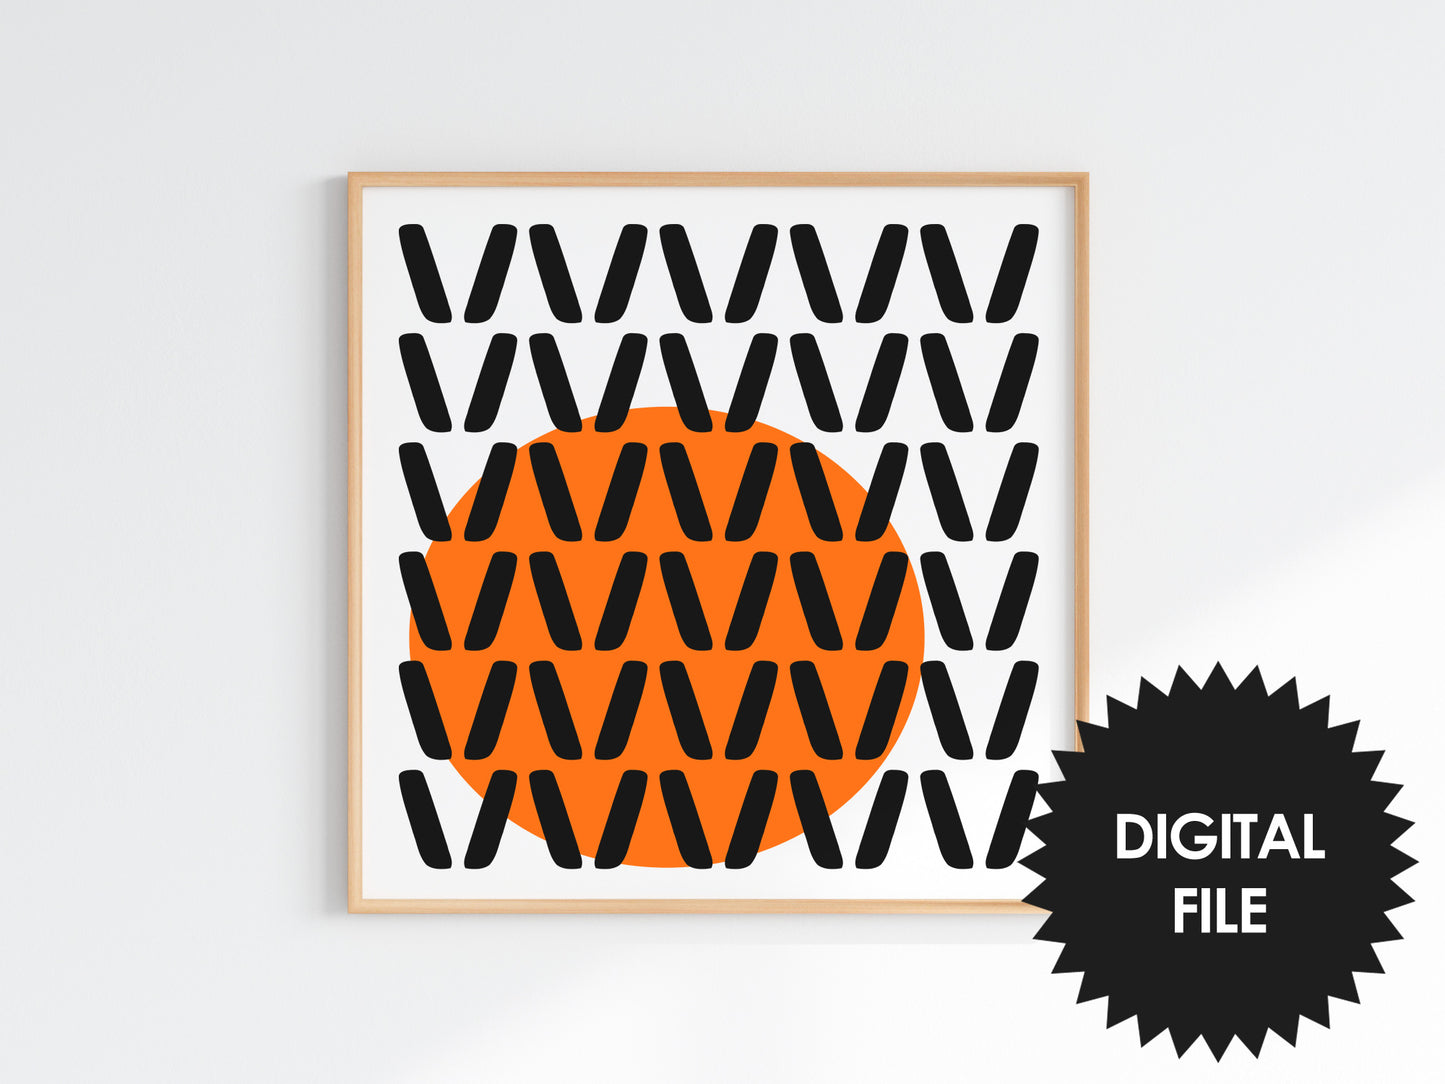 Halloween Inspired Abstract Wall Art Printable, Digital Download, Print at Home, Print Any Size Up To 20x20inch